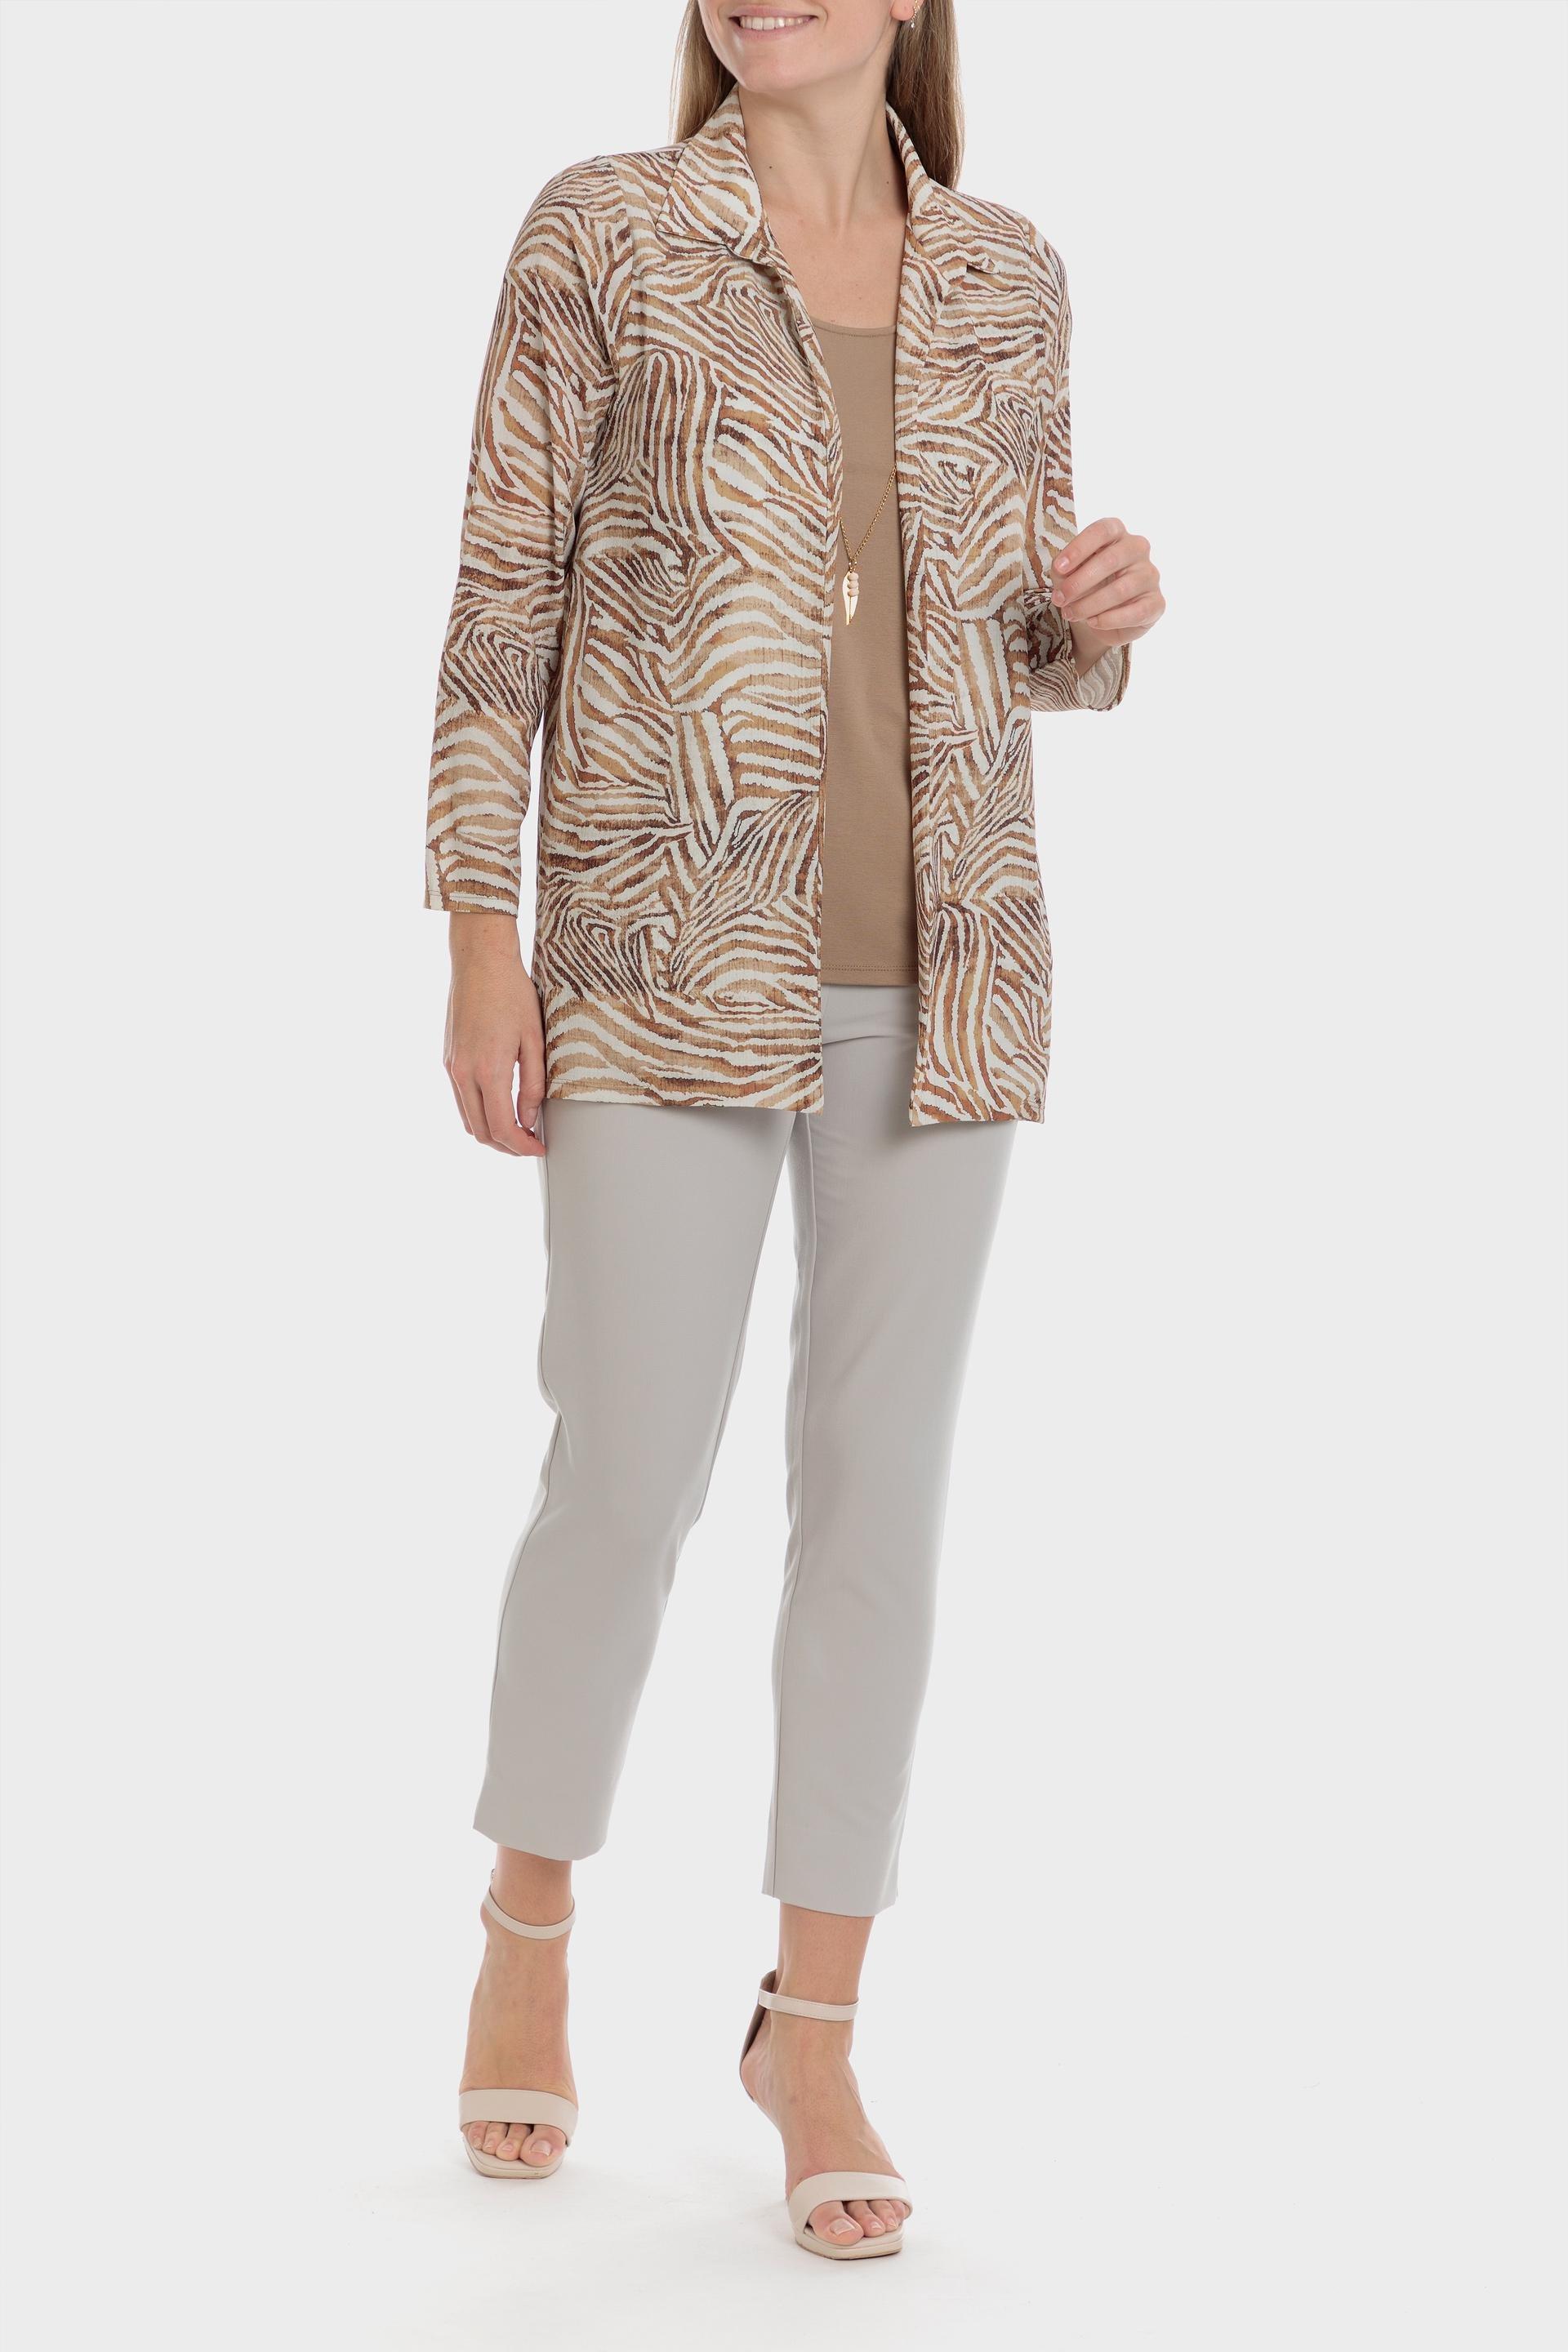 Punt Roma - Beige Faux Printed Twinset